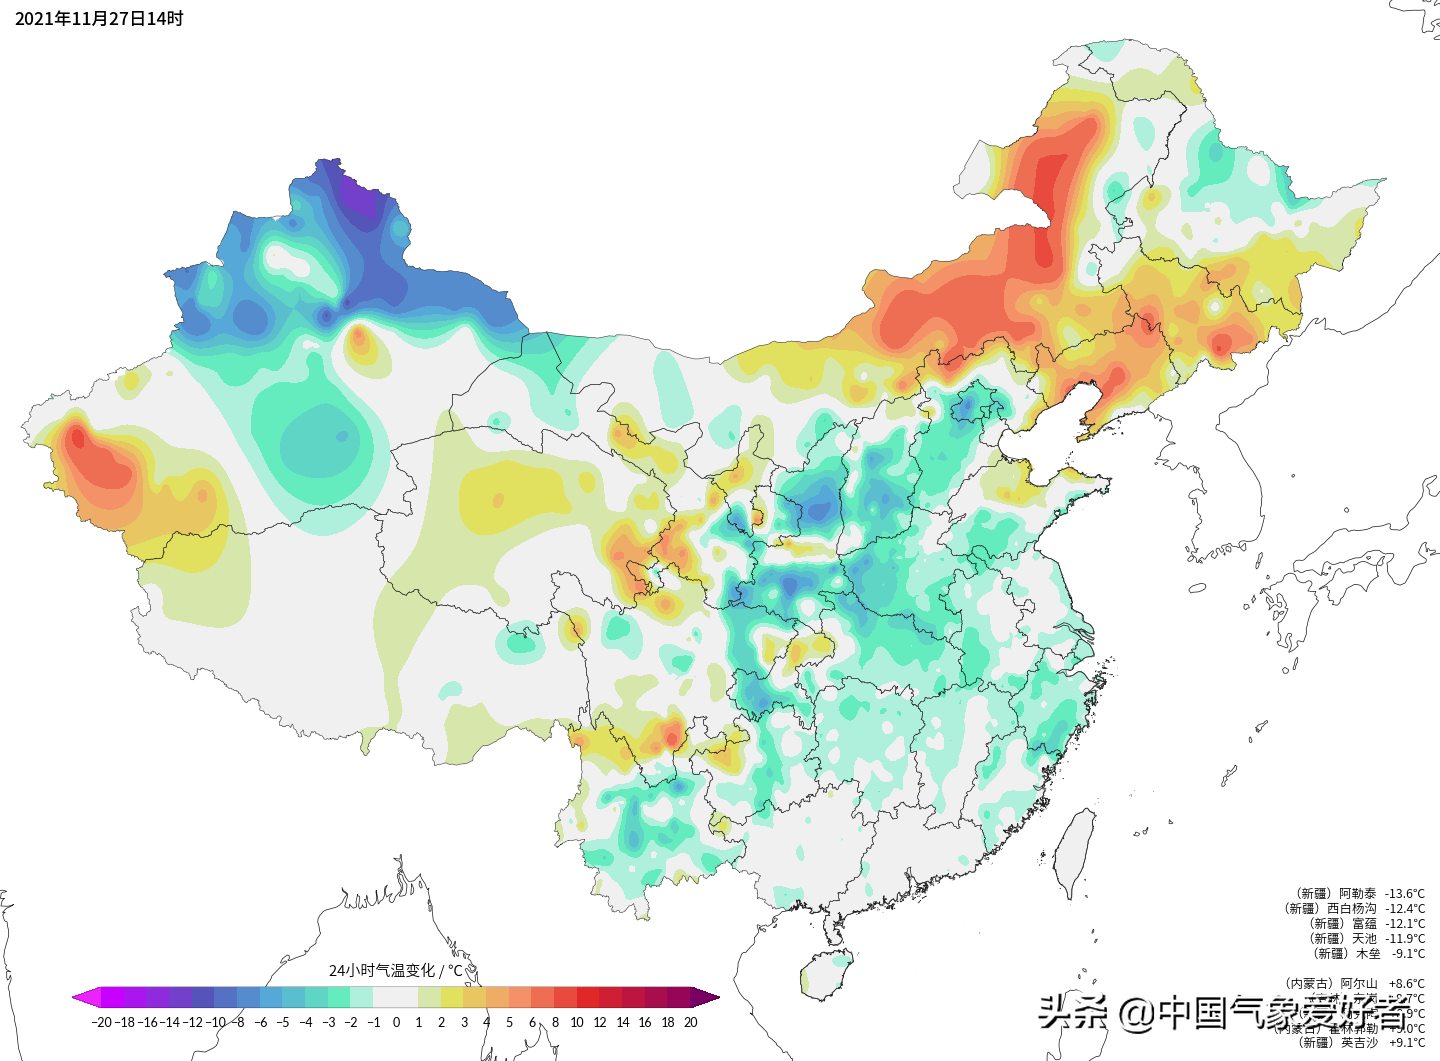 Blizzard is coming, Xinjiang is partially 1 meter! Authoritative forecast: Extraordinary blizzard has the point of view of Northeast